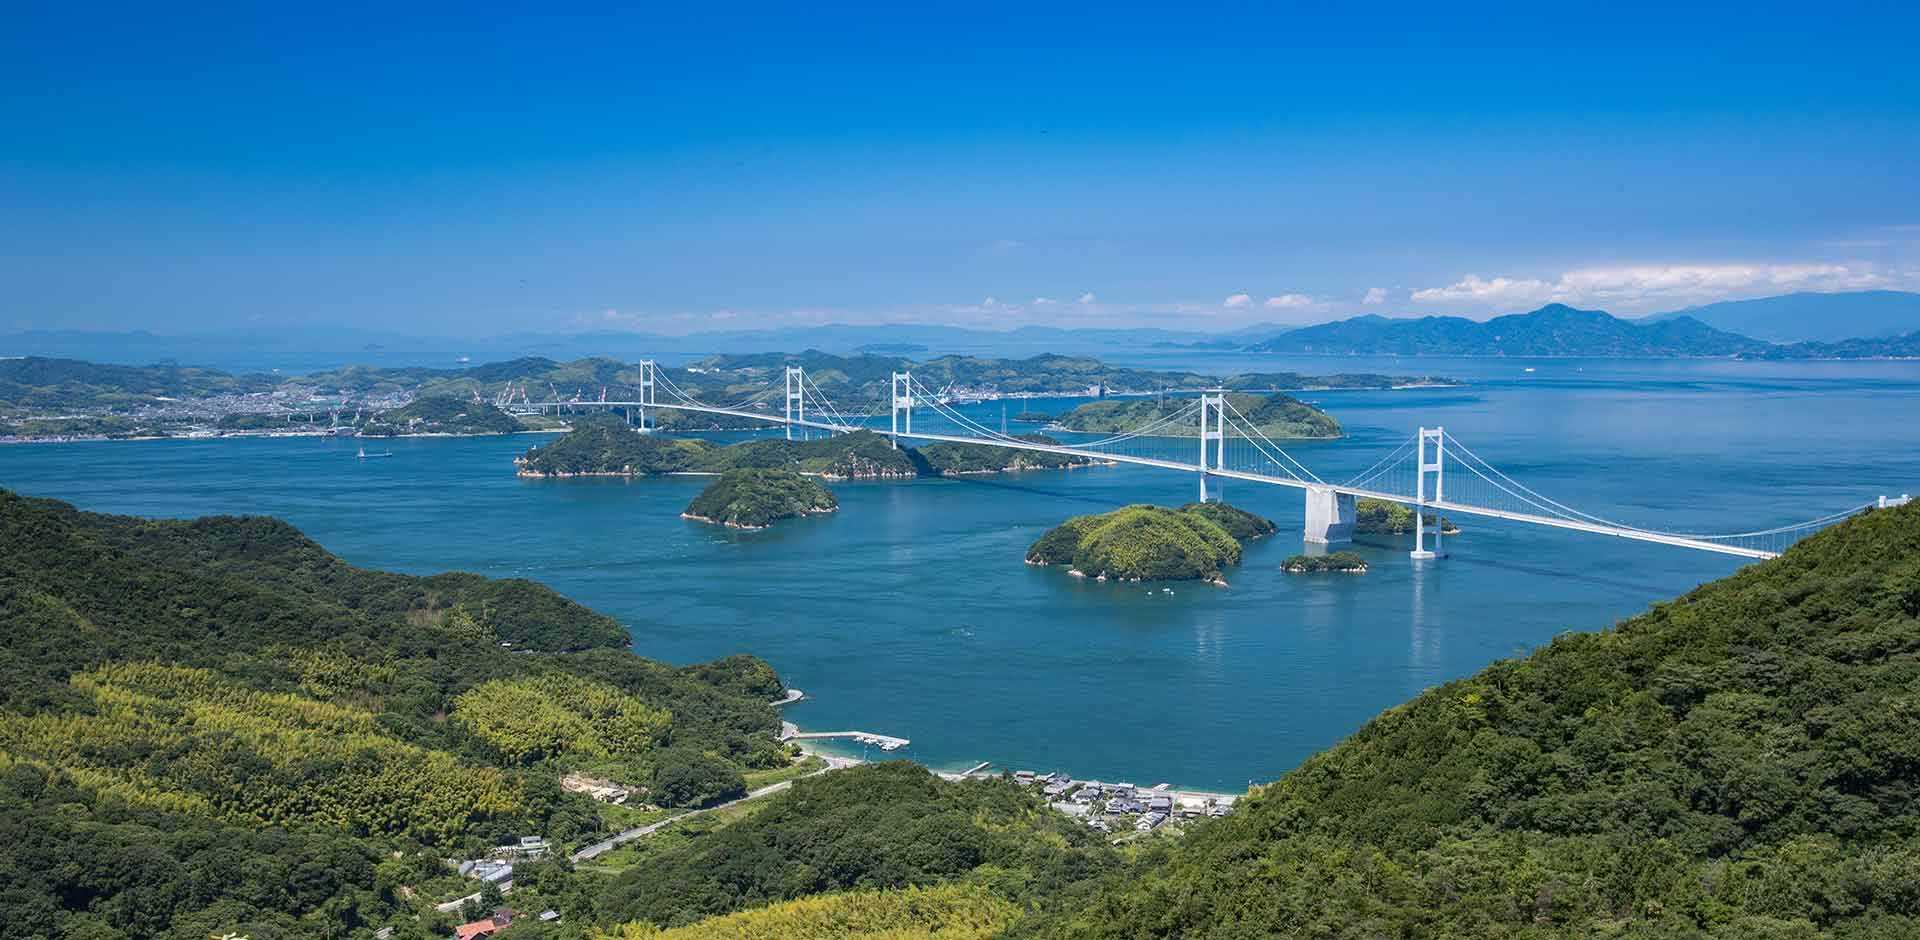 47-facts-about-imabari